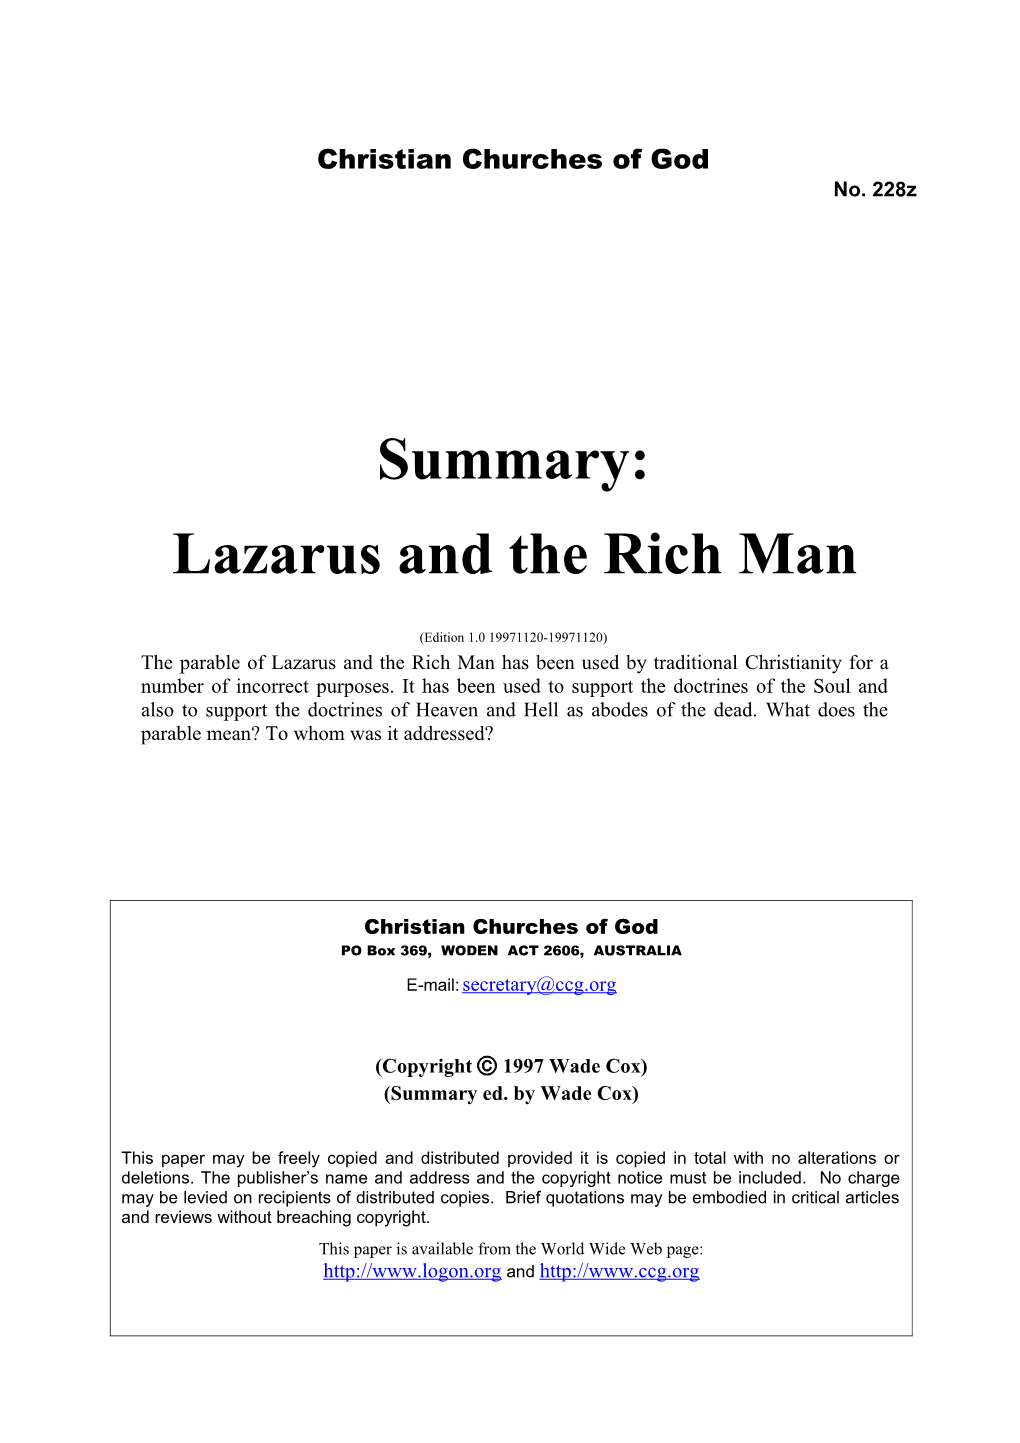 Summary: Lazarus and the Rich Man (No. 228Z)